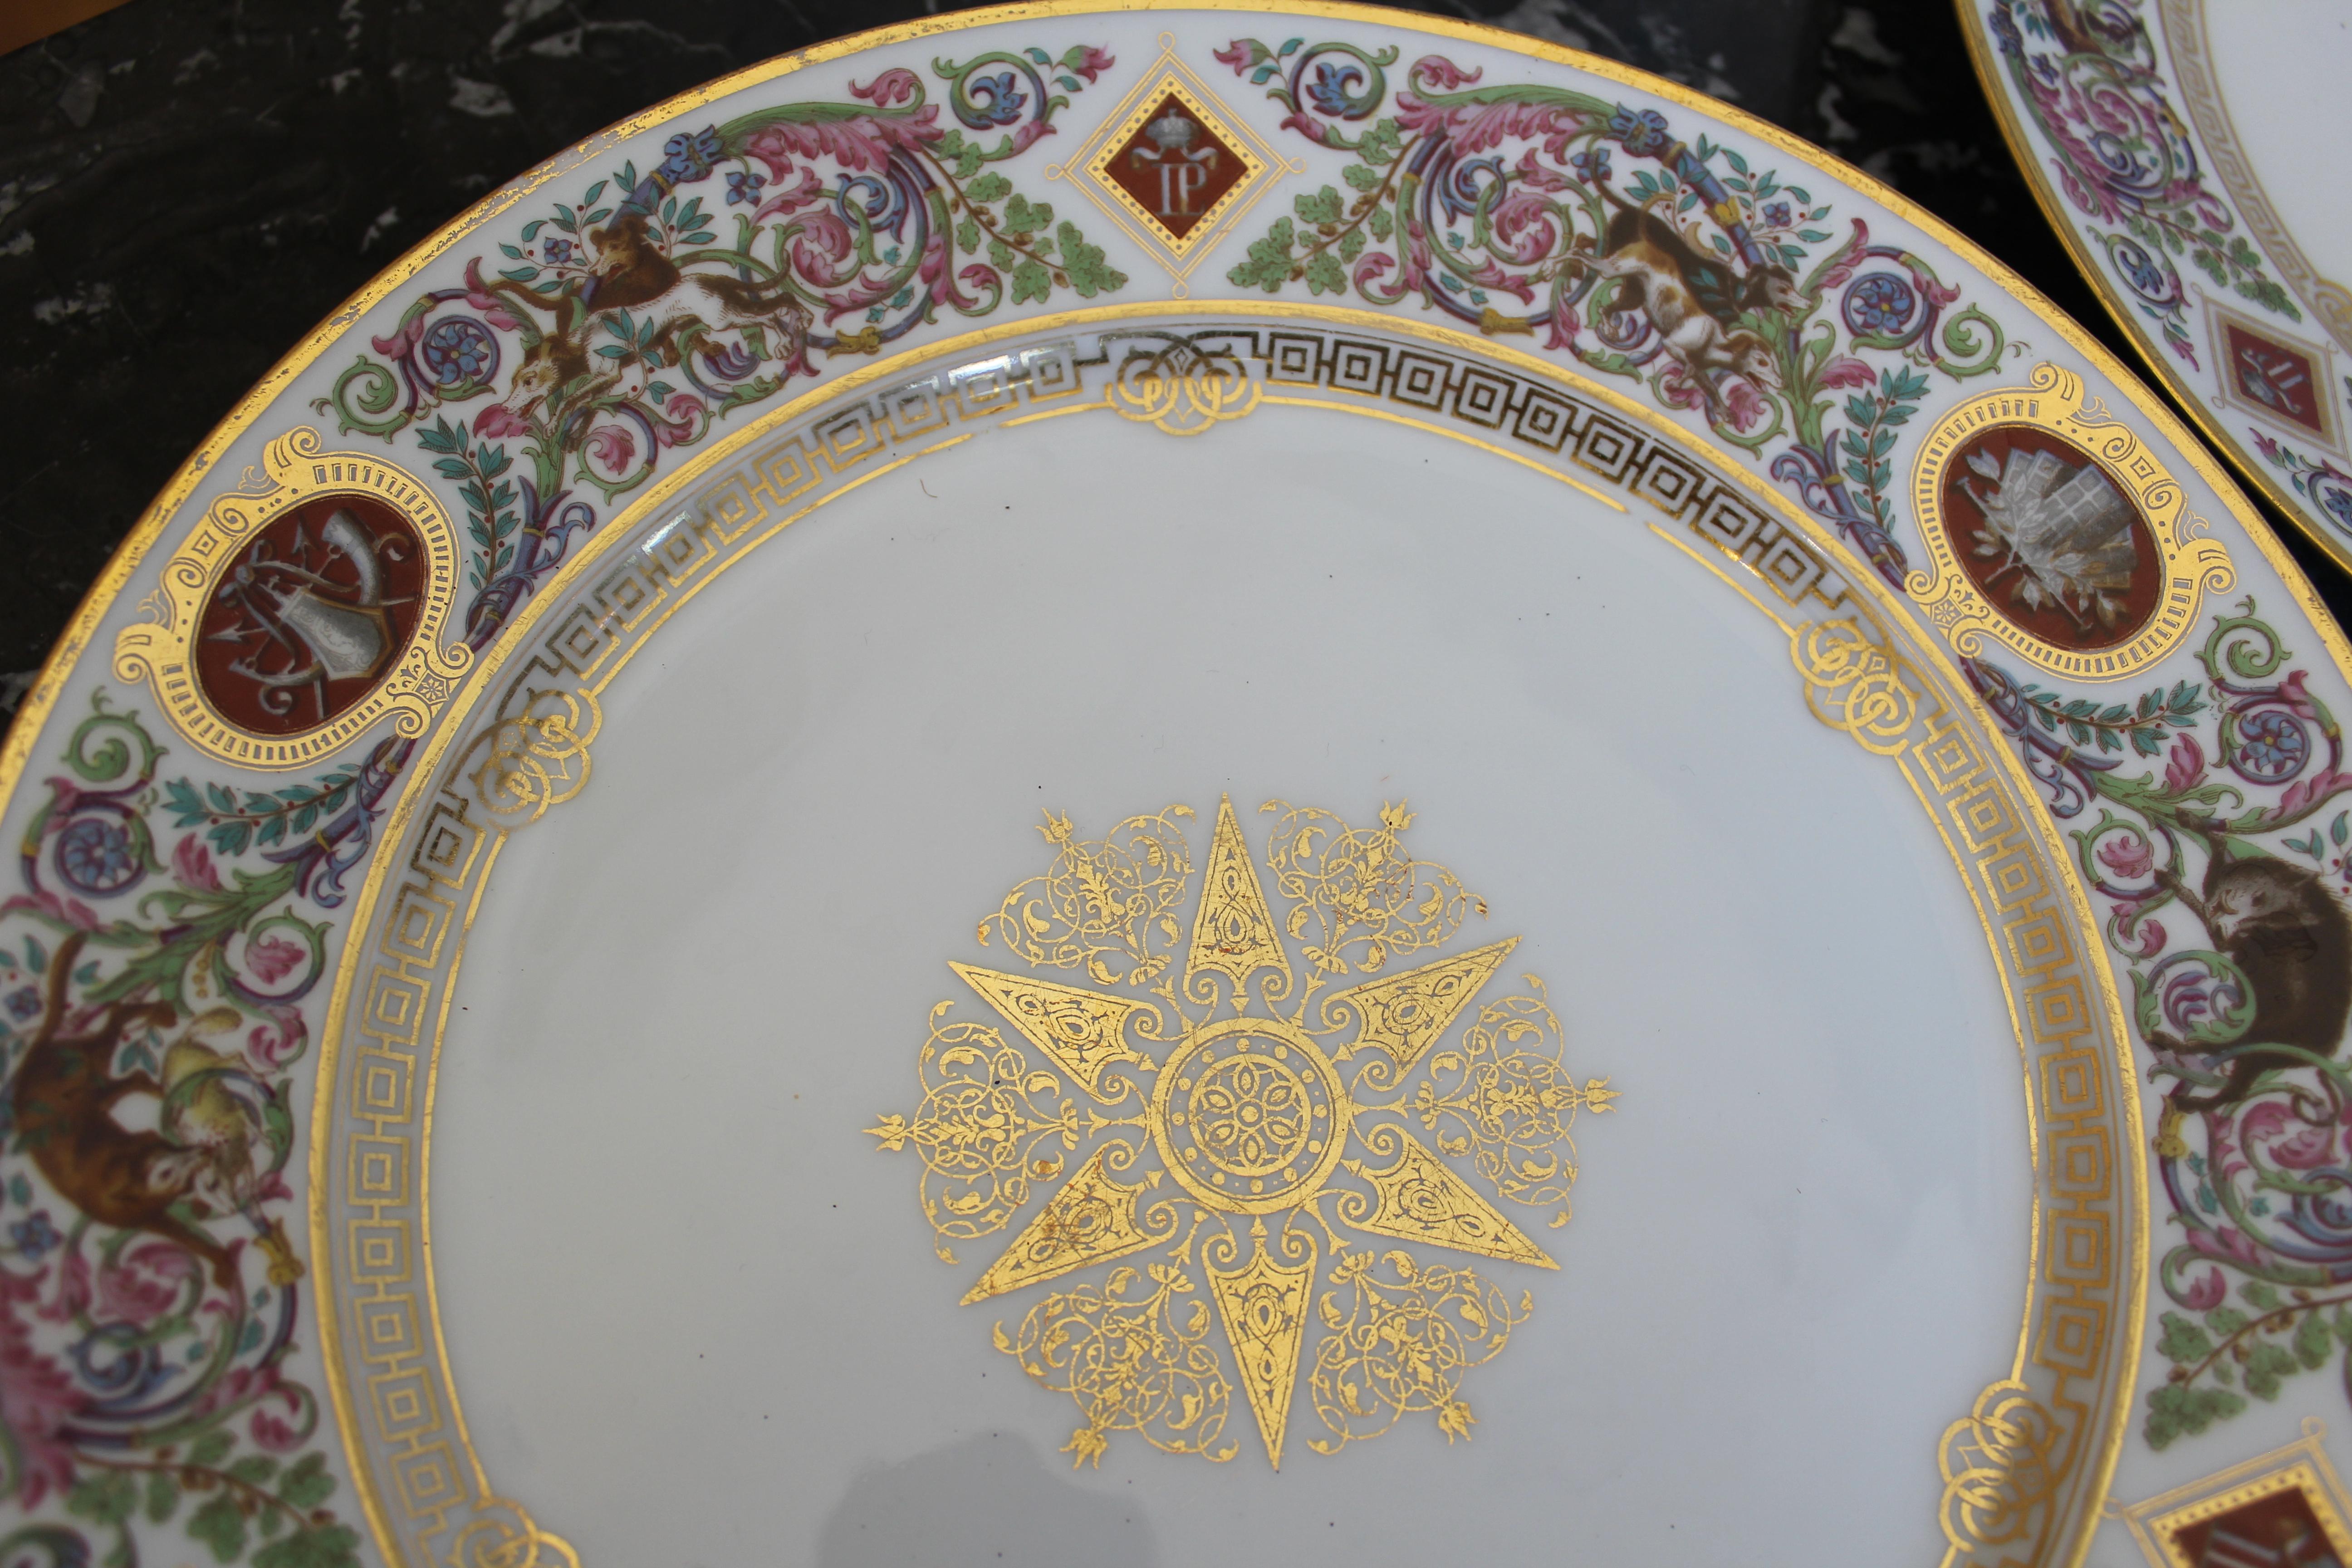  Sevres Chateau de Fountainbleu Pattern French Dinner or Cabinet Plates: 6 5